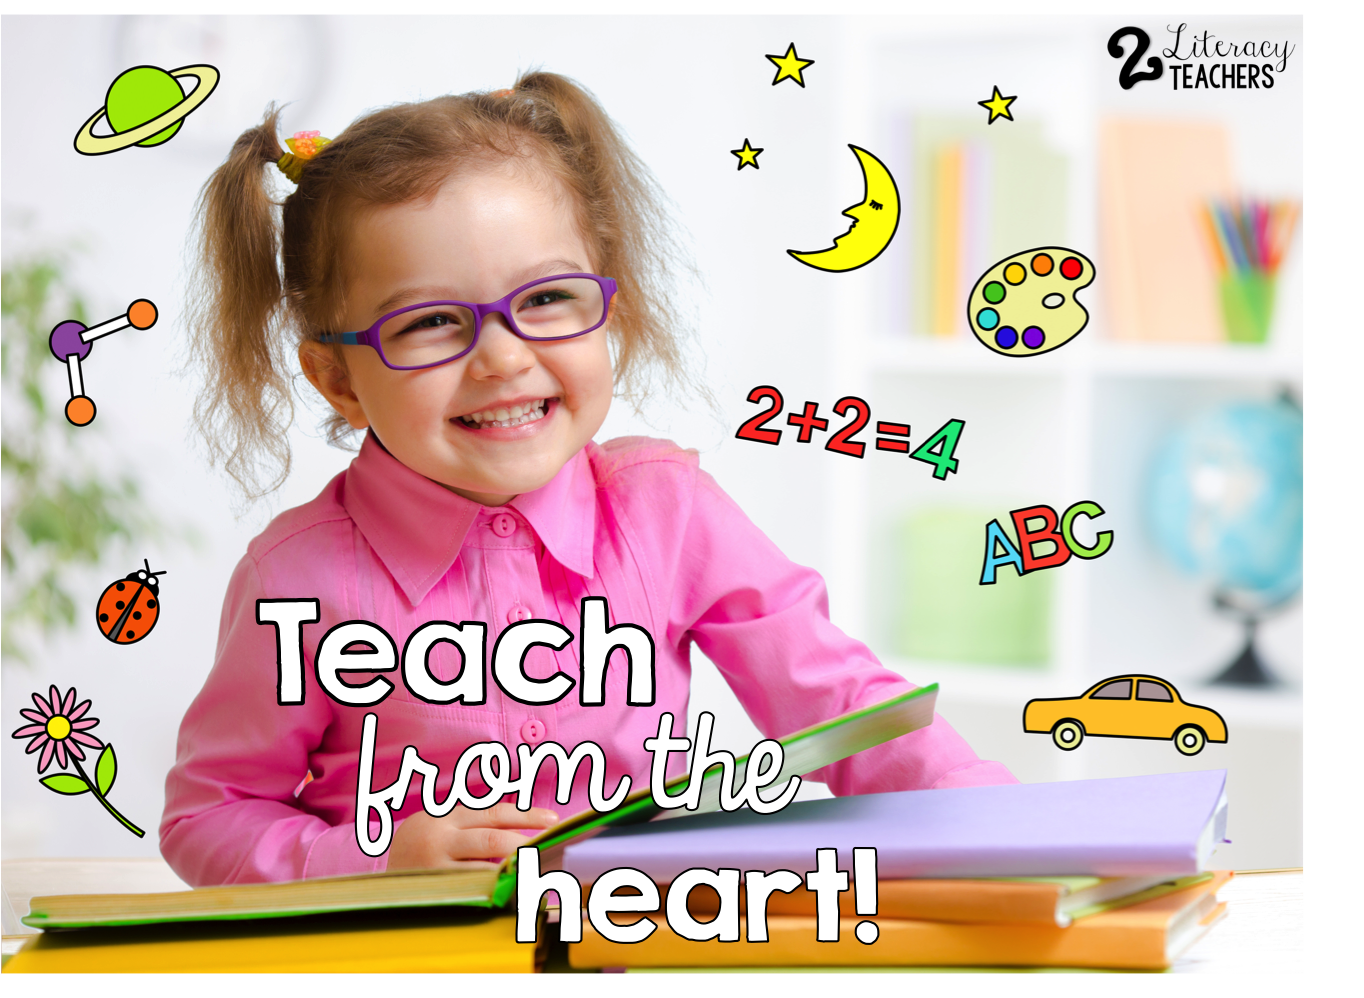 Encouragement – Teach from your heart!